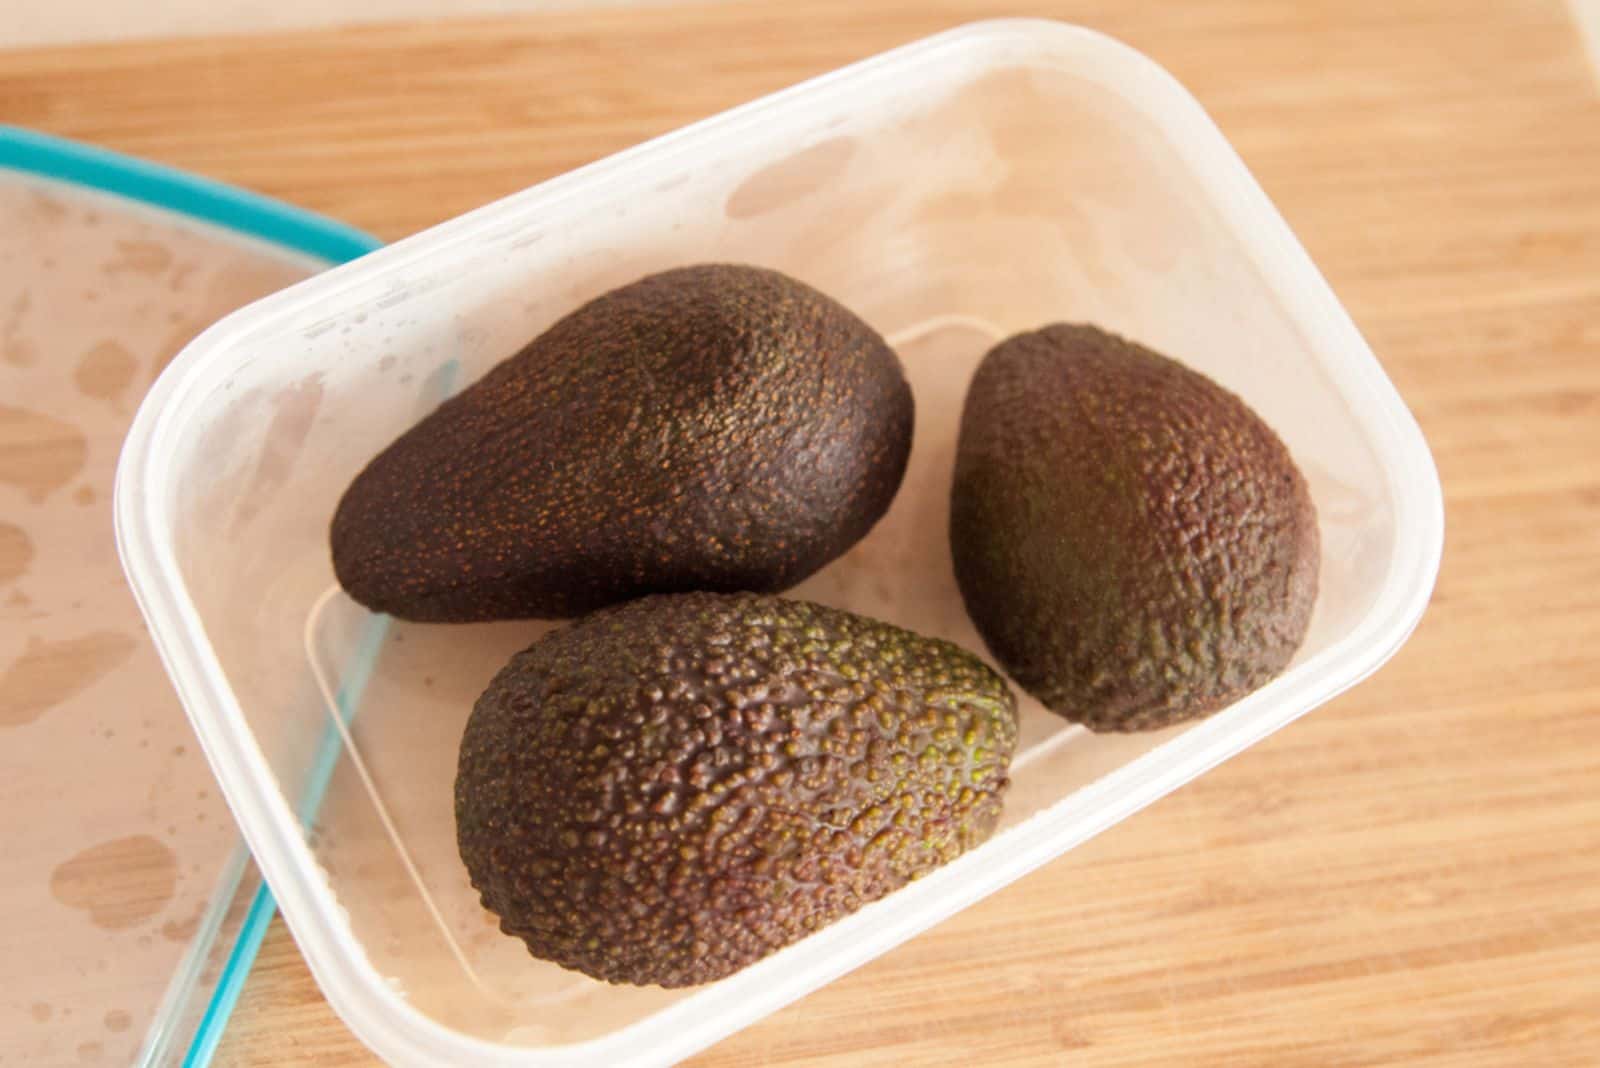 Three whole avocados in plastic container on bench top - to be stored in the fridge